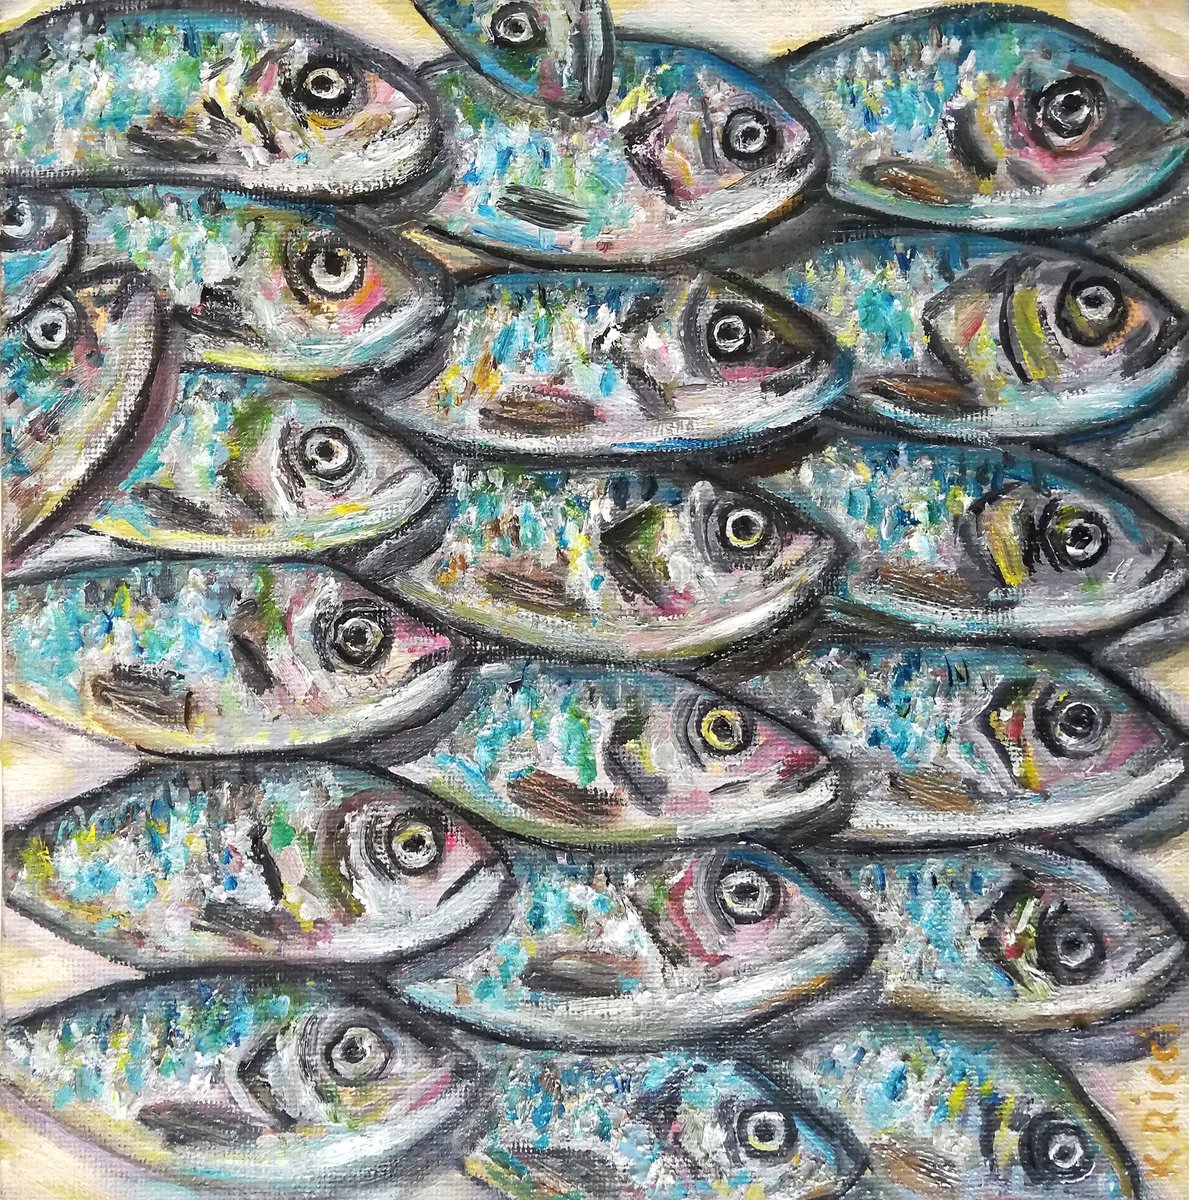 Fishes on Market Stall Original Oil on Canvas Board Painting 8 by 8 inches (20x20 cm) by Katia Ricci